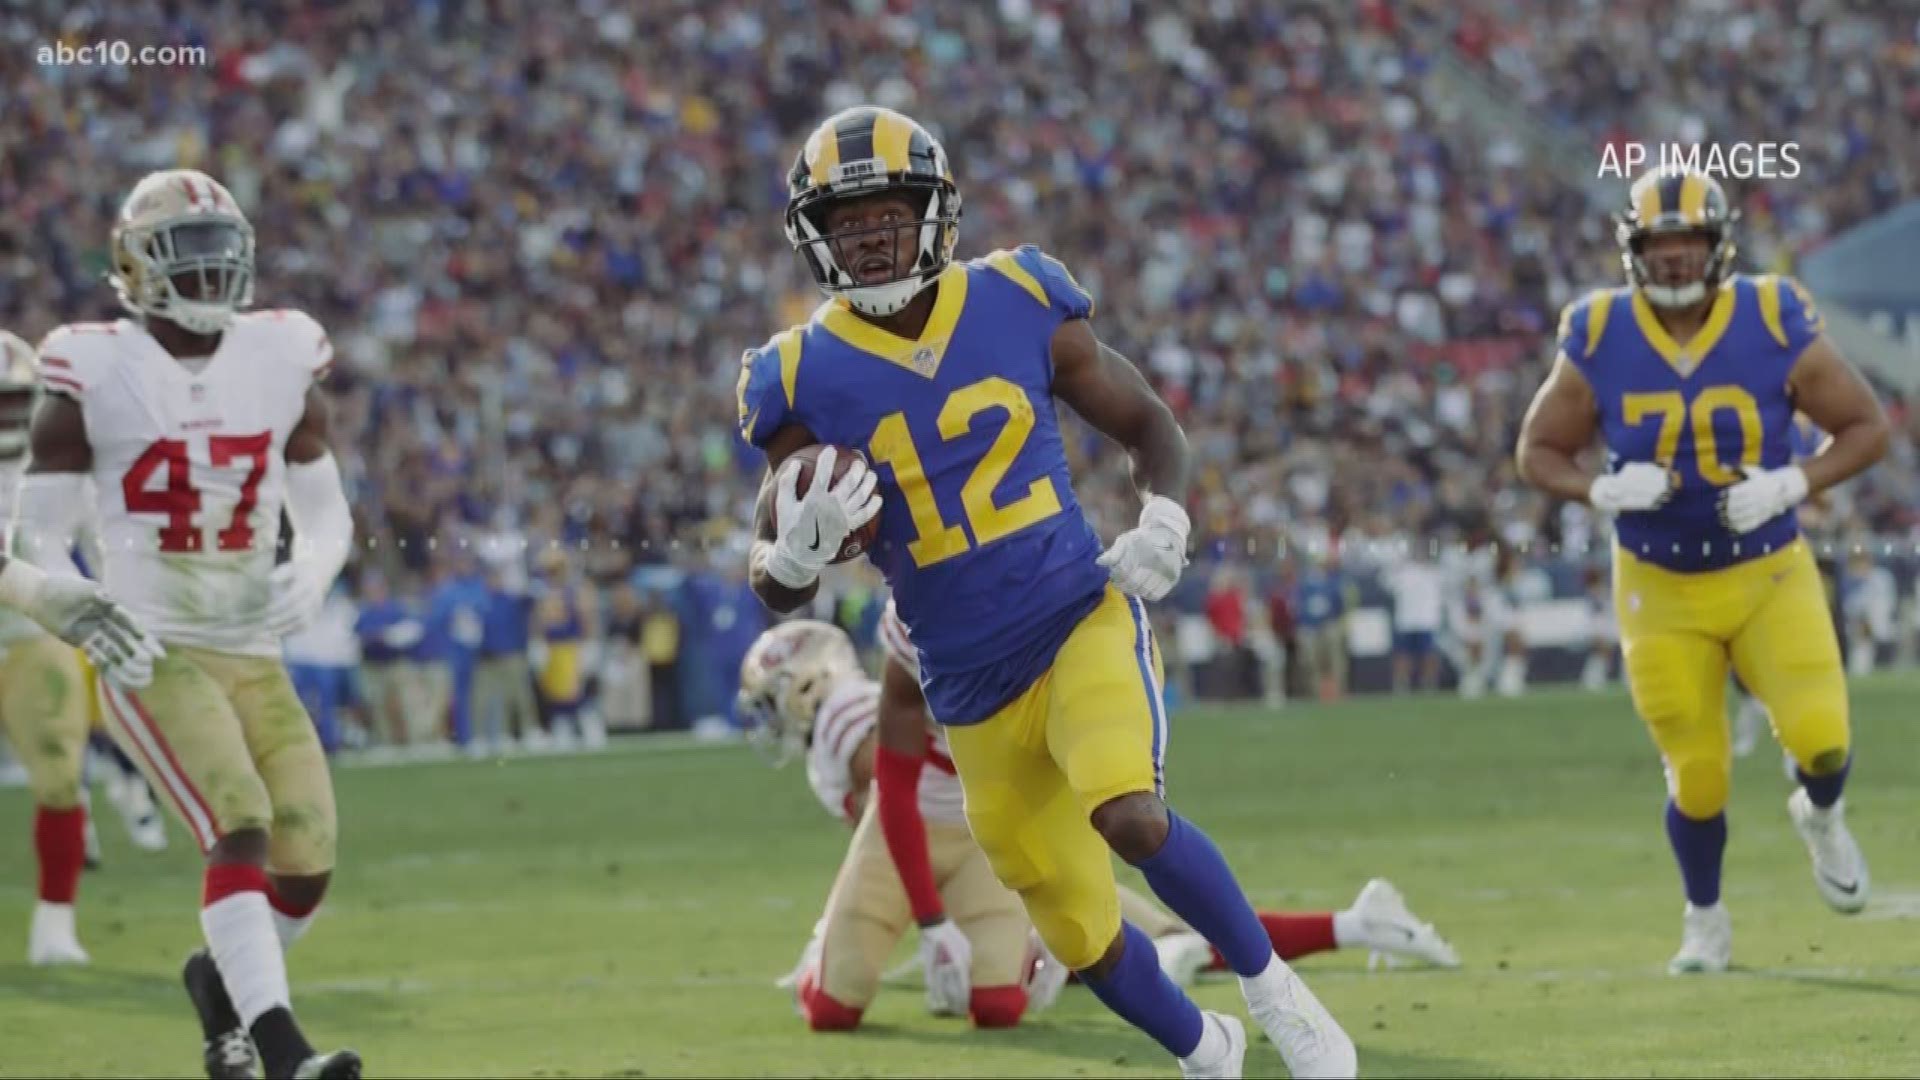 Los Angeles Rams wide receiver Brandin Cooks is donating $50,000 to help children in his hometown of Stockton impacted by the coronavirus crisis.